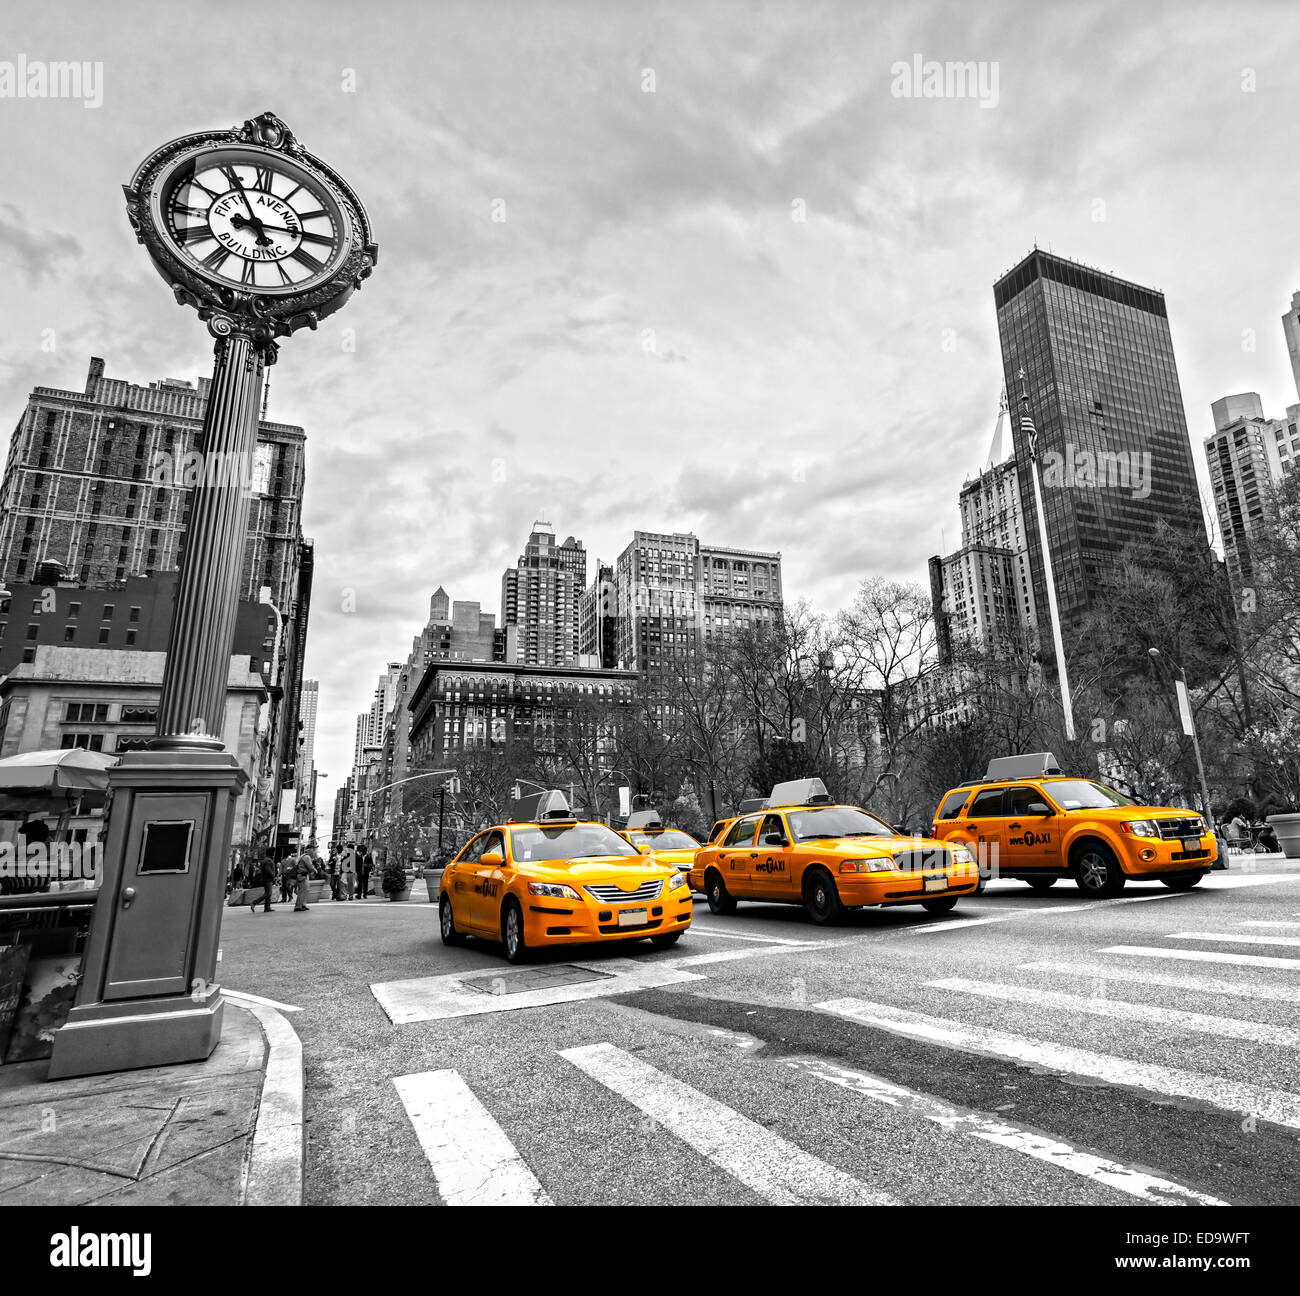 NEW YORK - JULY 21: Yellow taxis on 5th Avenue on July 21 2012 in New York, USA. 5th Avenue is a central road of Manhattan, the Stock Photo